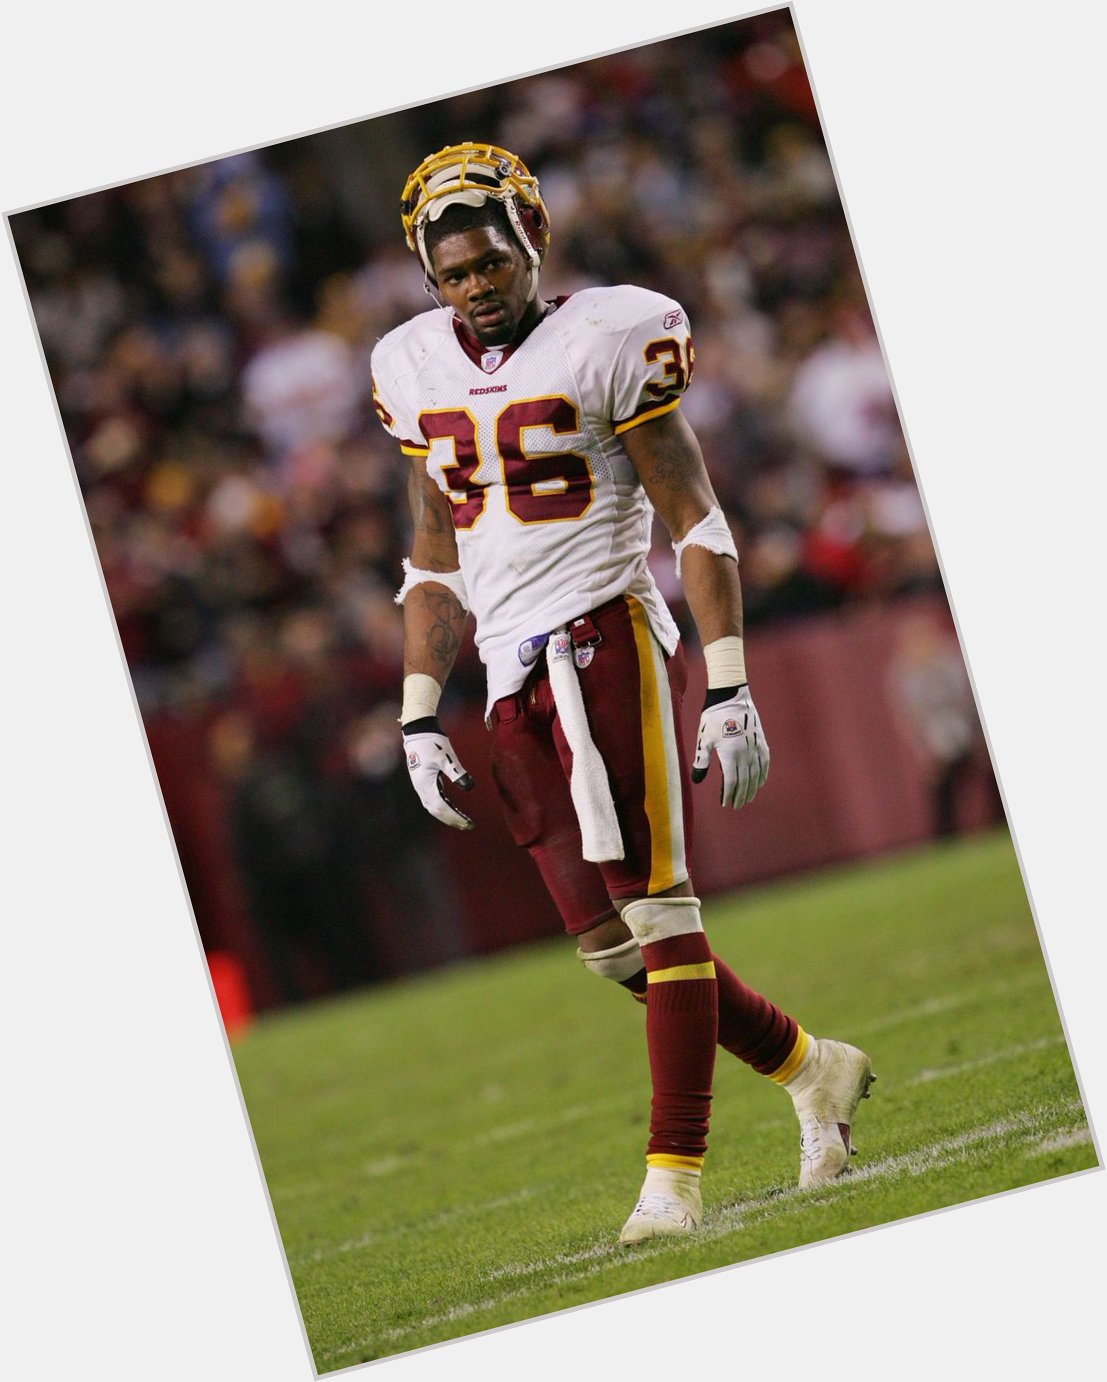 Happy birthday Sean Taylor Today he would ve celebrated his 38th birthday. RIP 